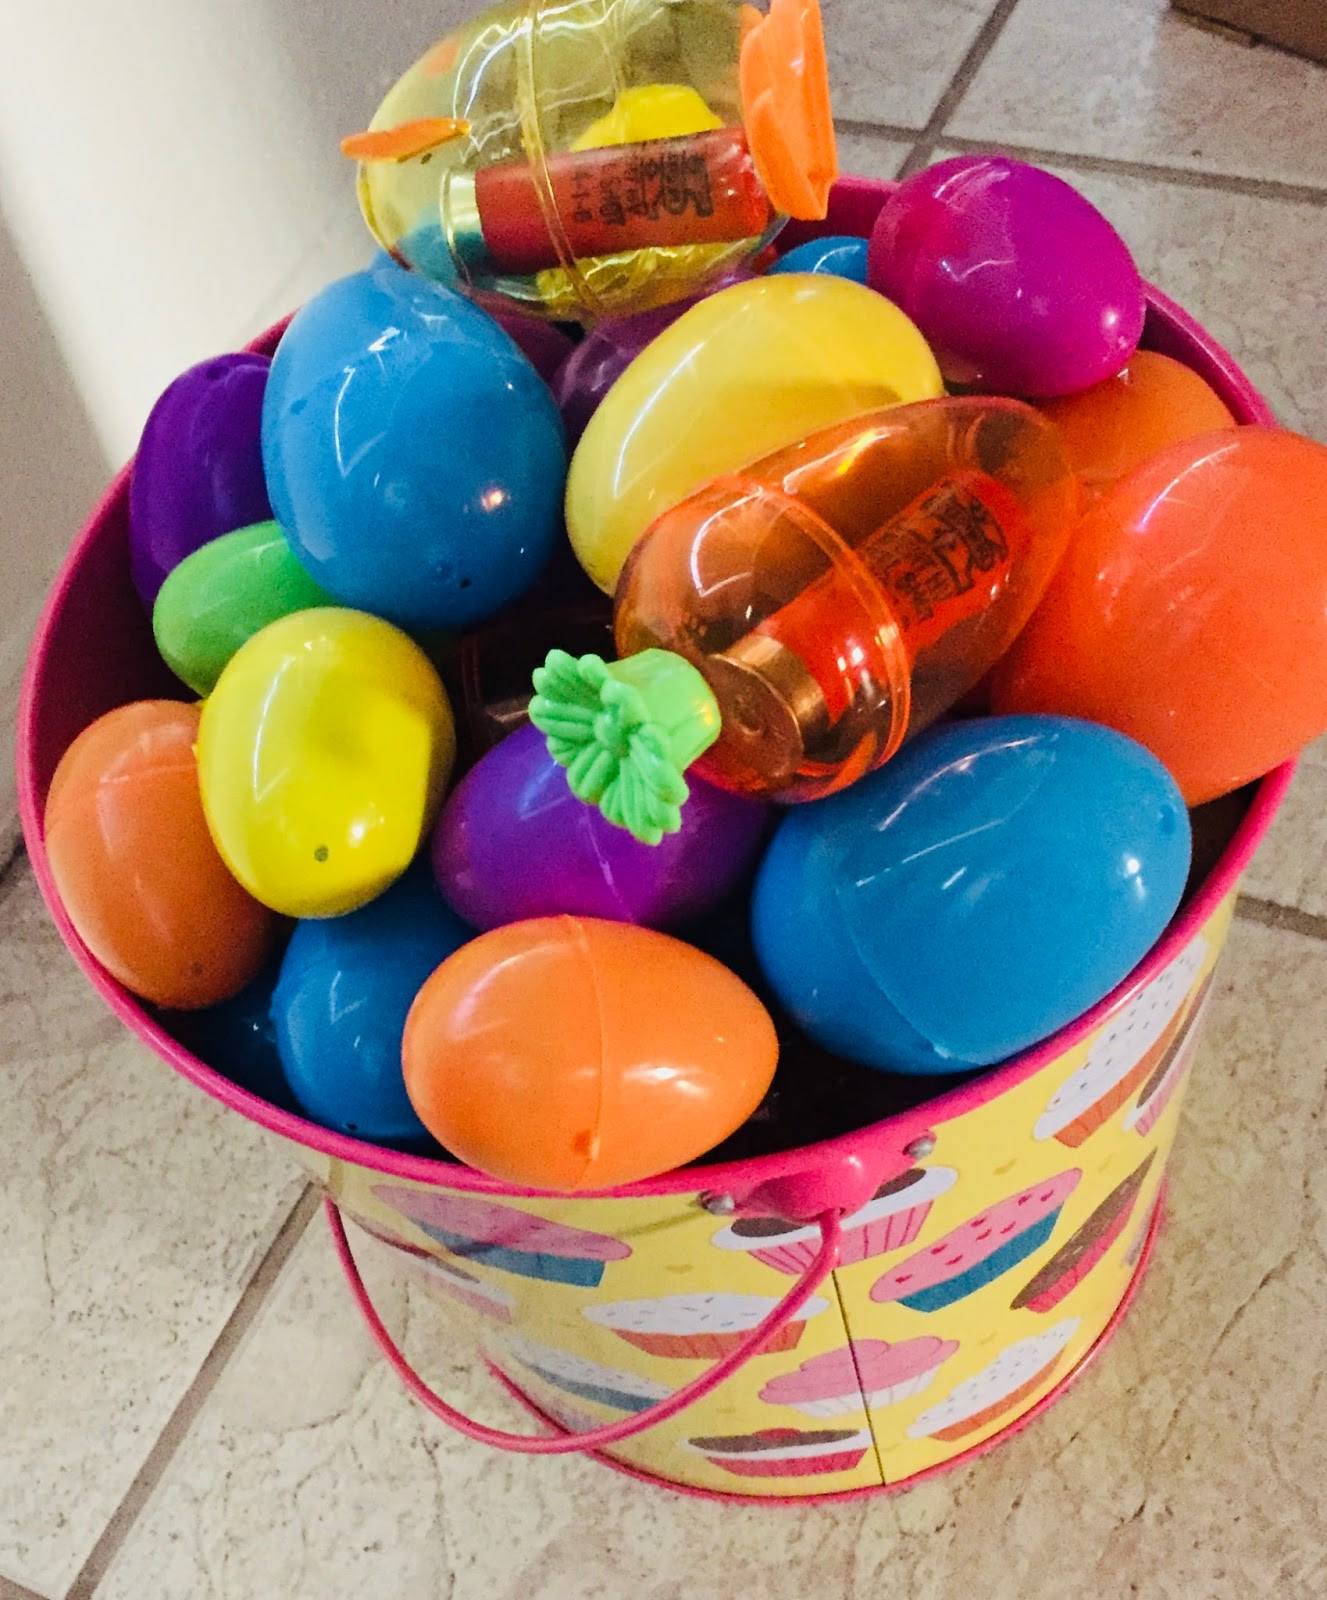 Ideas For Easter Egg Fillers
 The Busy Broad Adult Easter Egg Hunt Fun Egg Filler Ideas